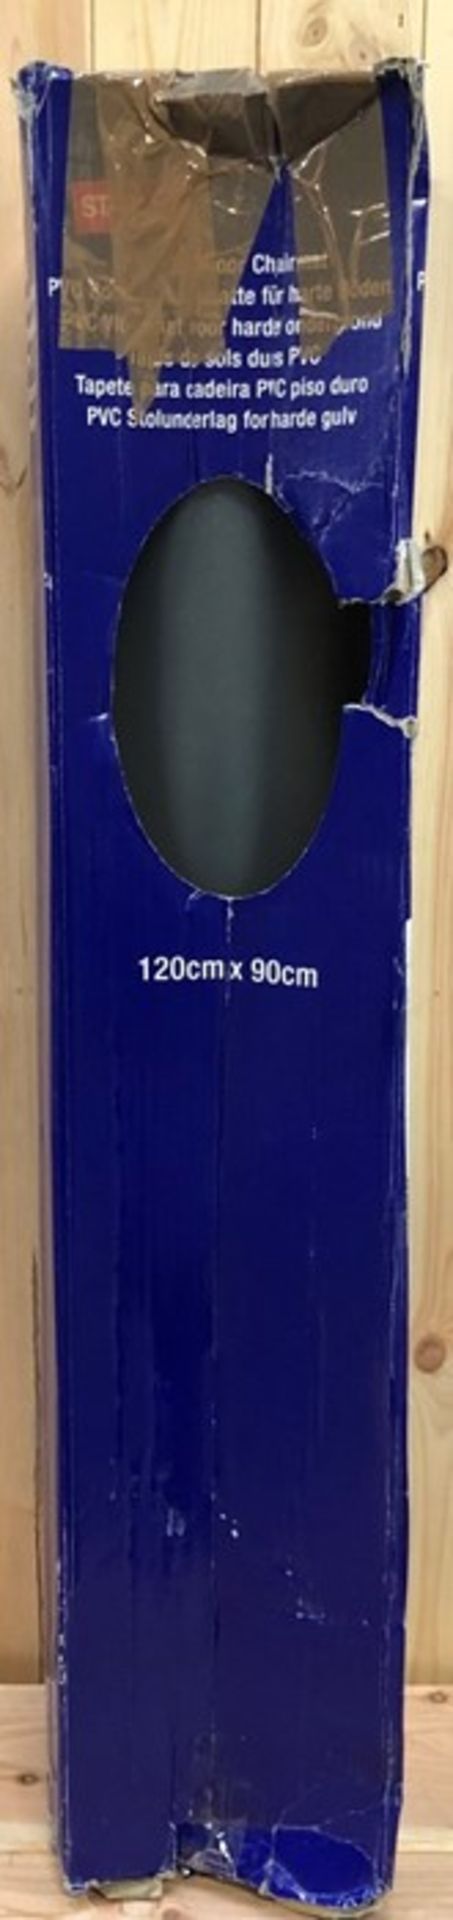 1 BOXED PVC HARD FLOOR CHAIRMAT / SIZE 120 X 90CM / RRP £35.99 (PUBLIC VIEWING AVAILABLE) - Image 2 of 2